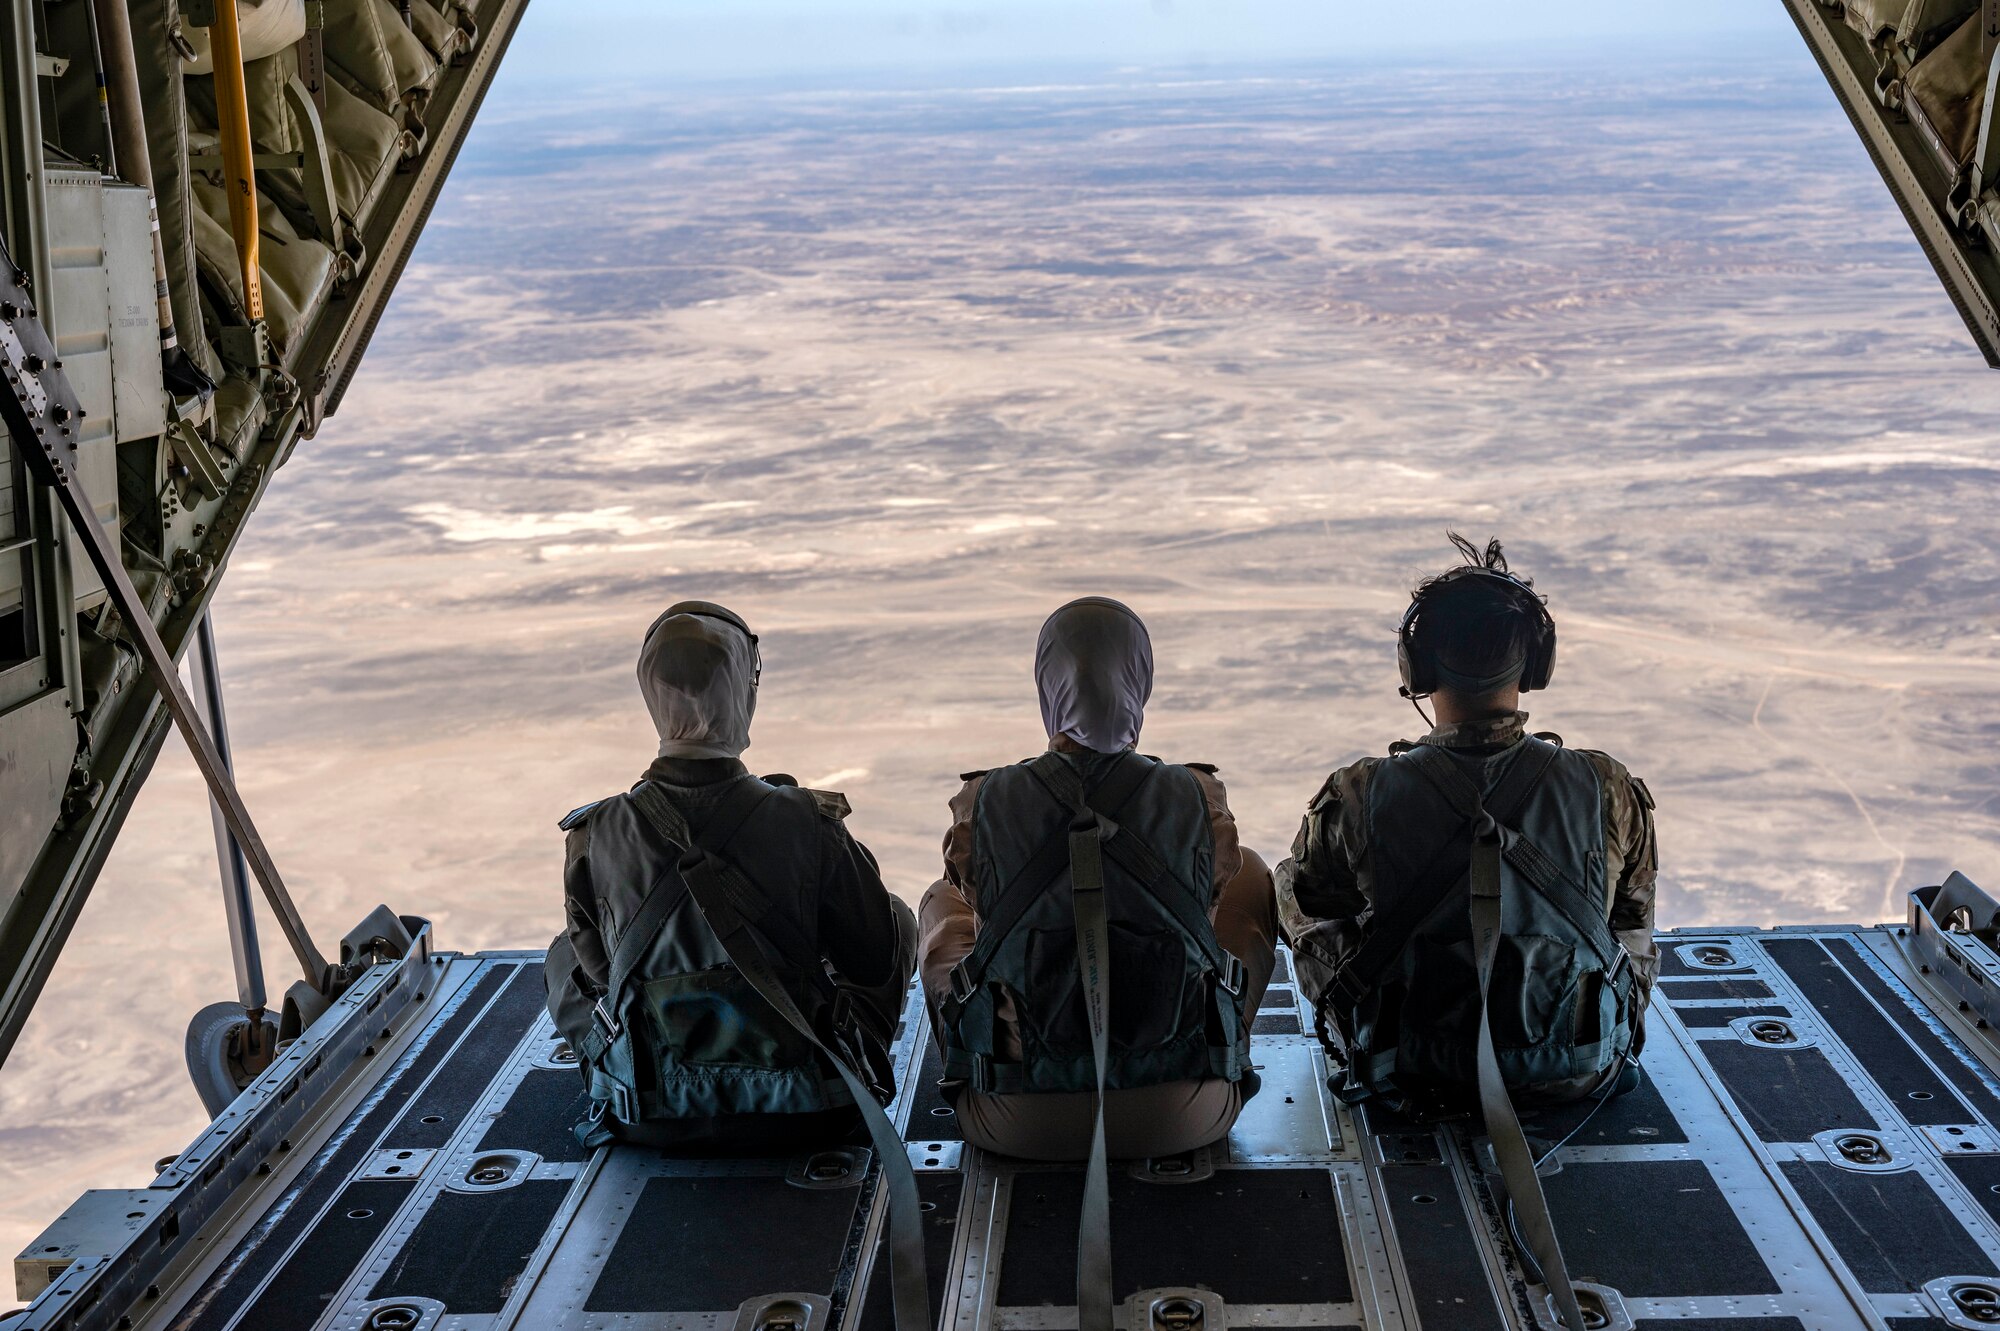 Two Royal Jordanian Air Force female pilots and a U.S. Air Force loadmaster look out from back of an HC-130J Combat King II aircraft during a low-level mission over outlying areas of Wadi Rum, Jordan on May 16, 2022, . The engagement is part of an ongoing partnership between the two countries focused on empowering women in aviation as a way to cultivate and strengthen relationships. (U.S. Air Force photo by Master Sgt. Kelly Goonan)